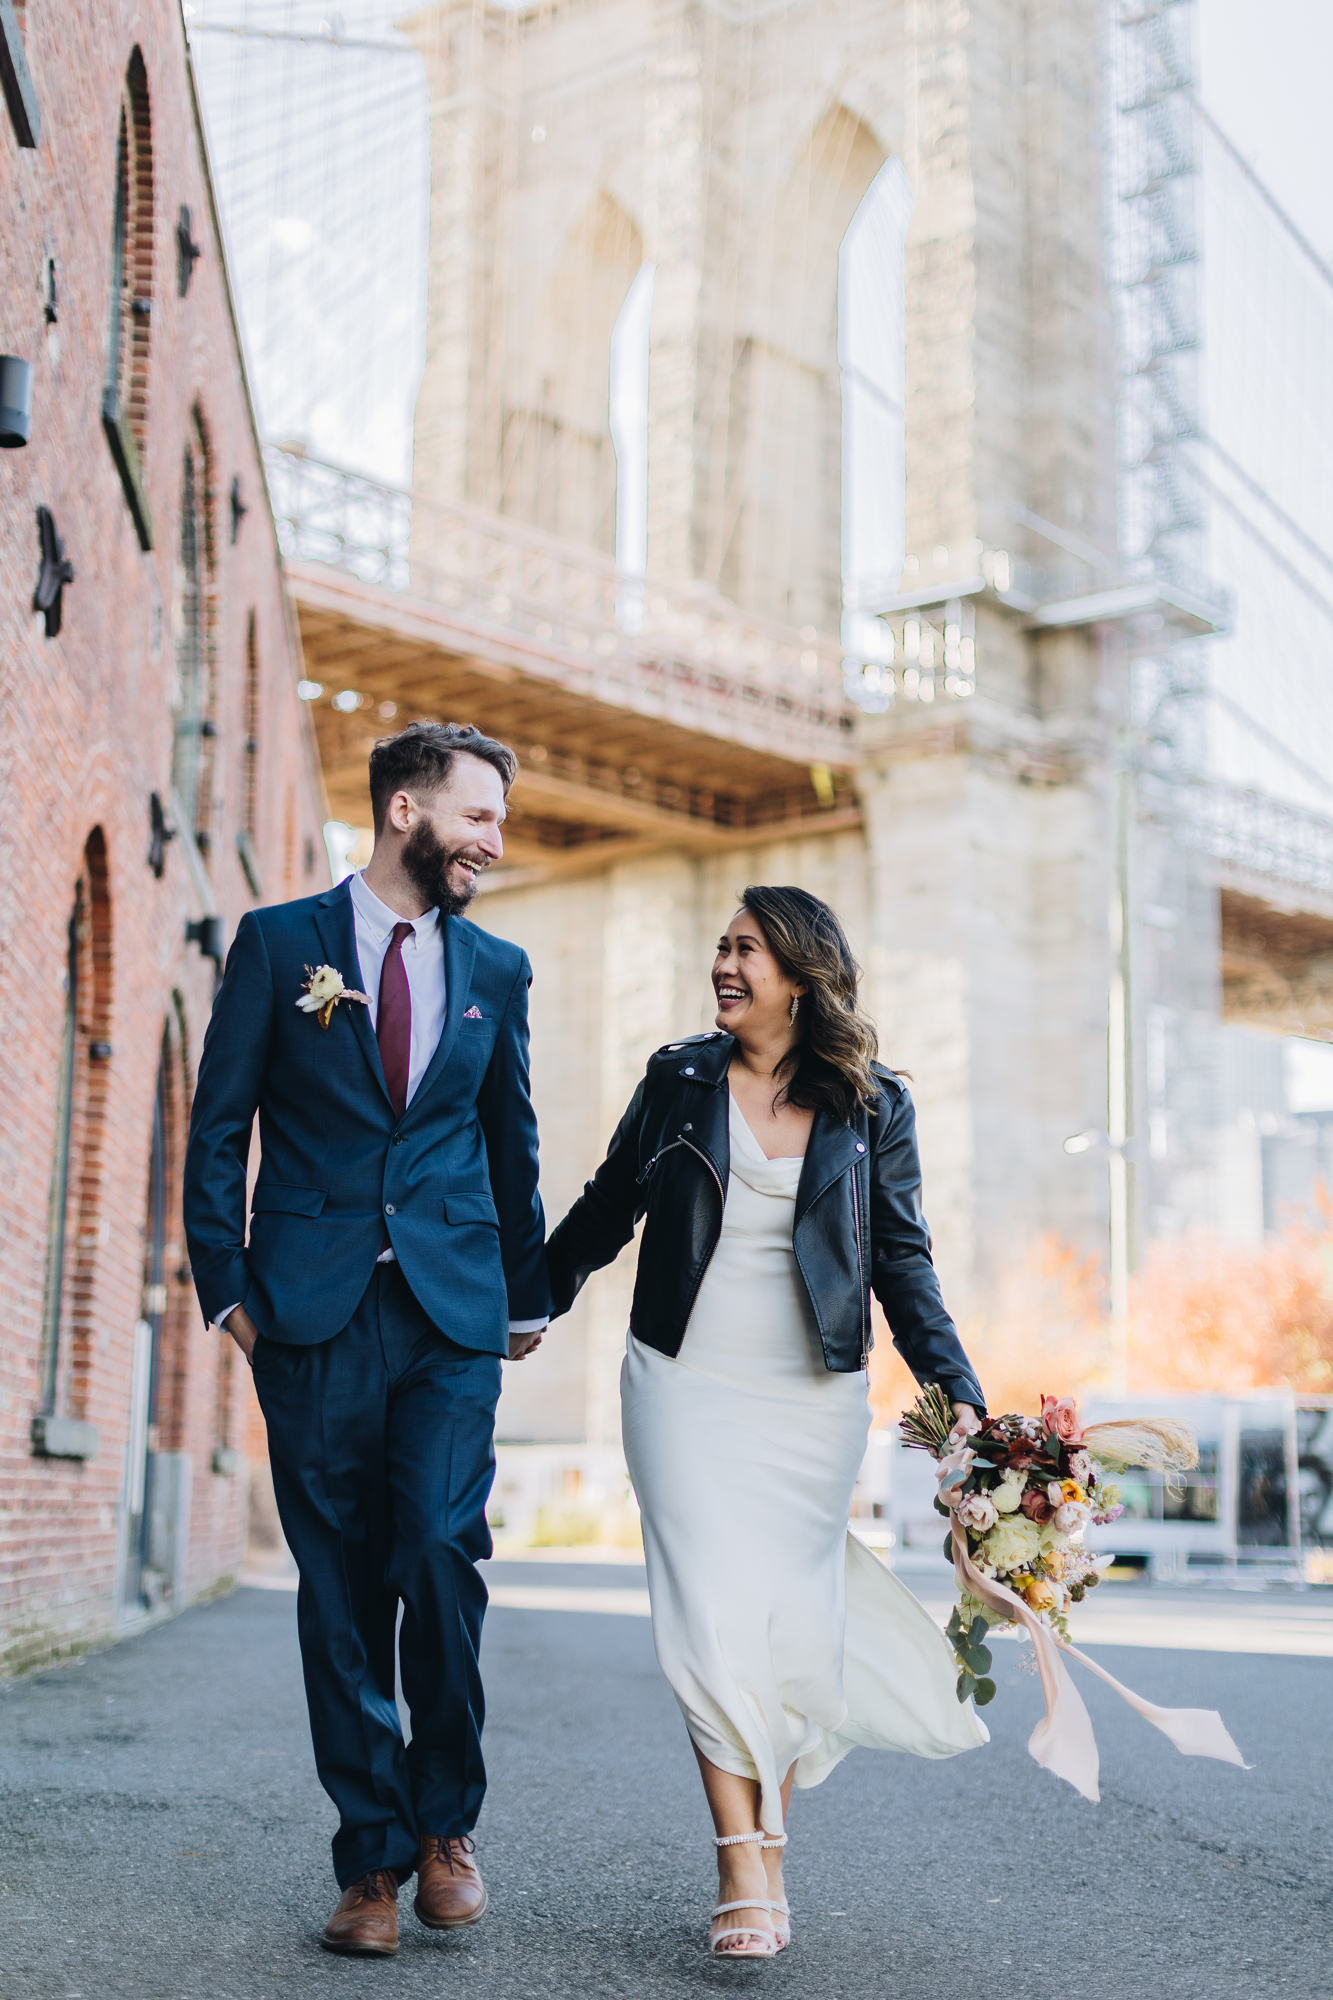 Dumbo Brooklyn elopement photos with Brooklyn Bridge in the background